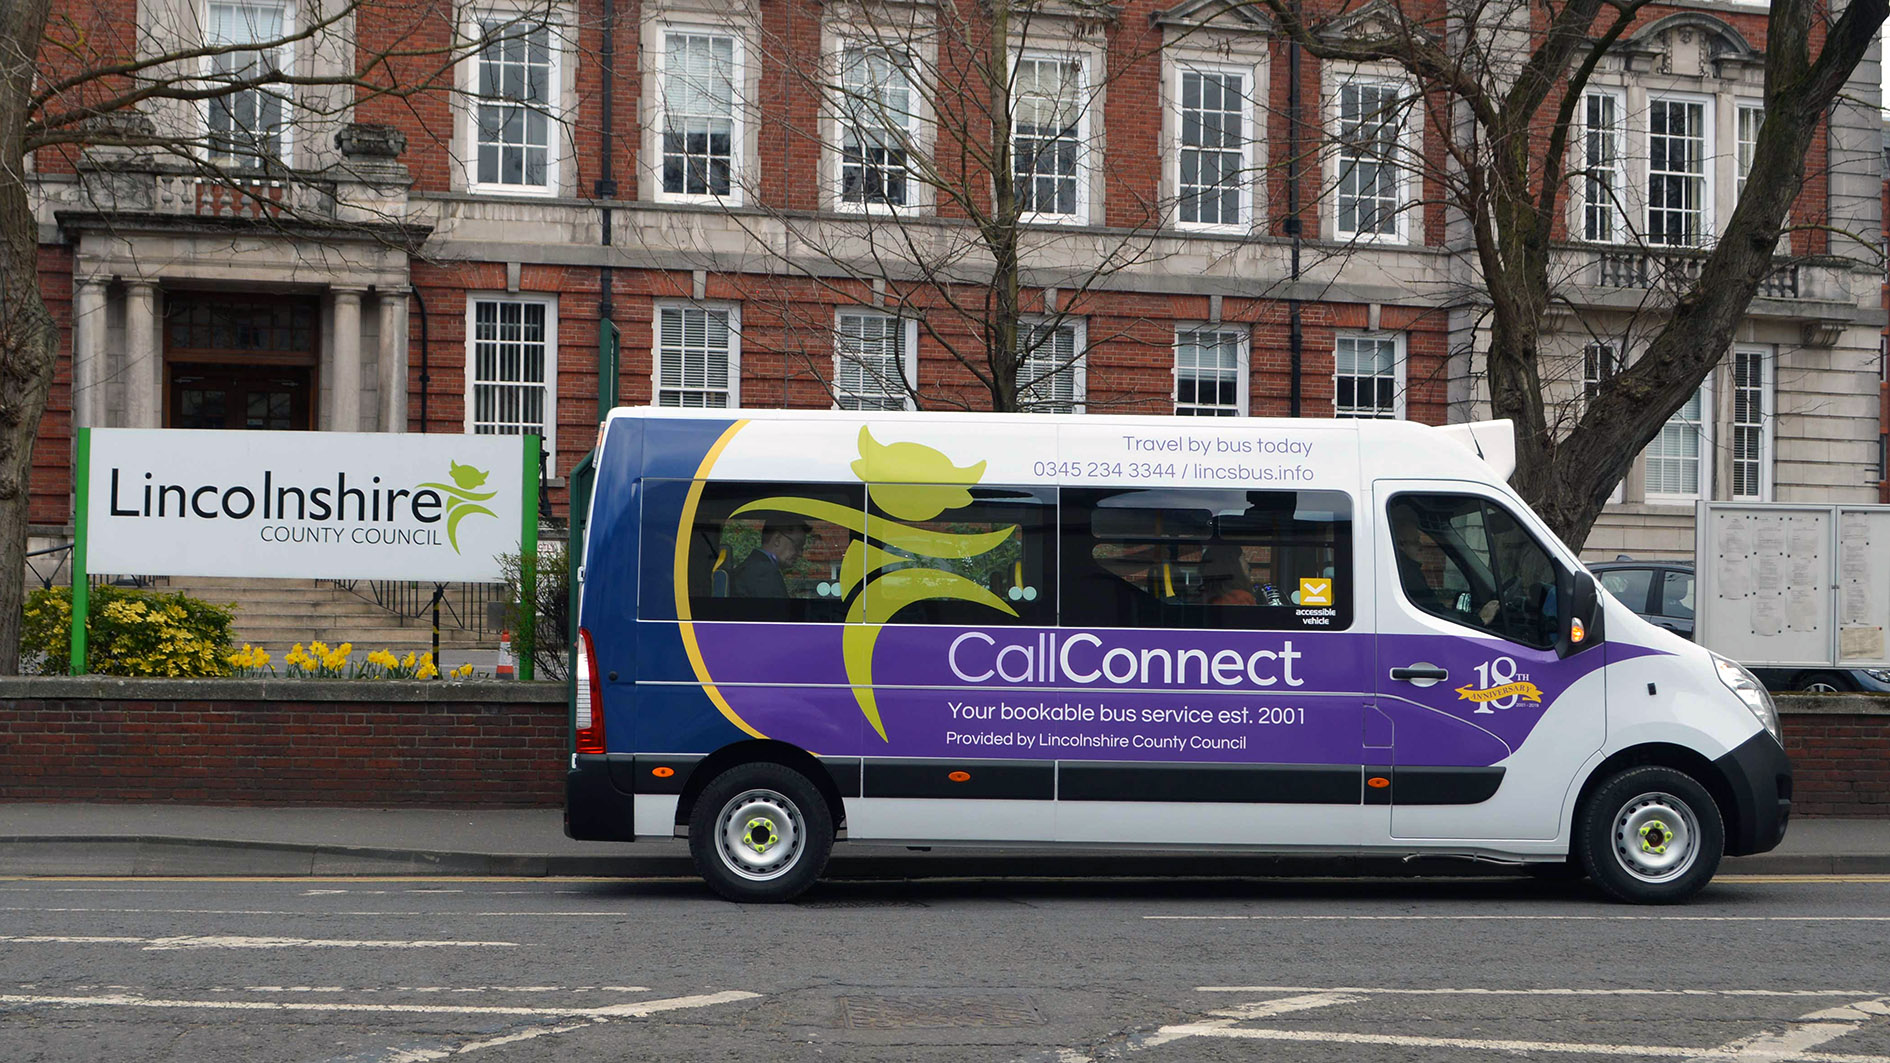 LCC callconnect bus outside the council building.